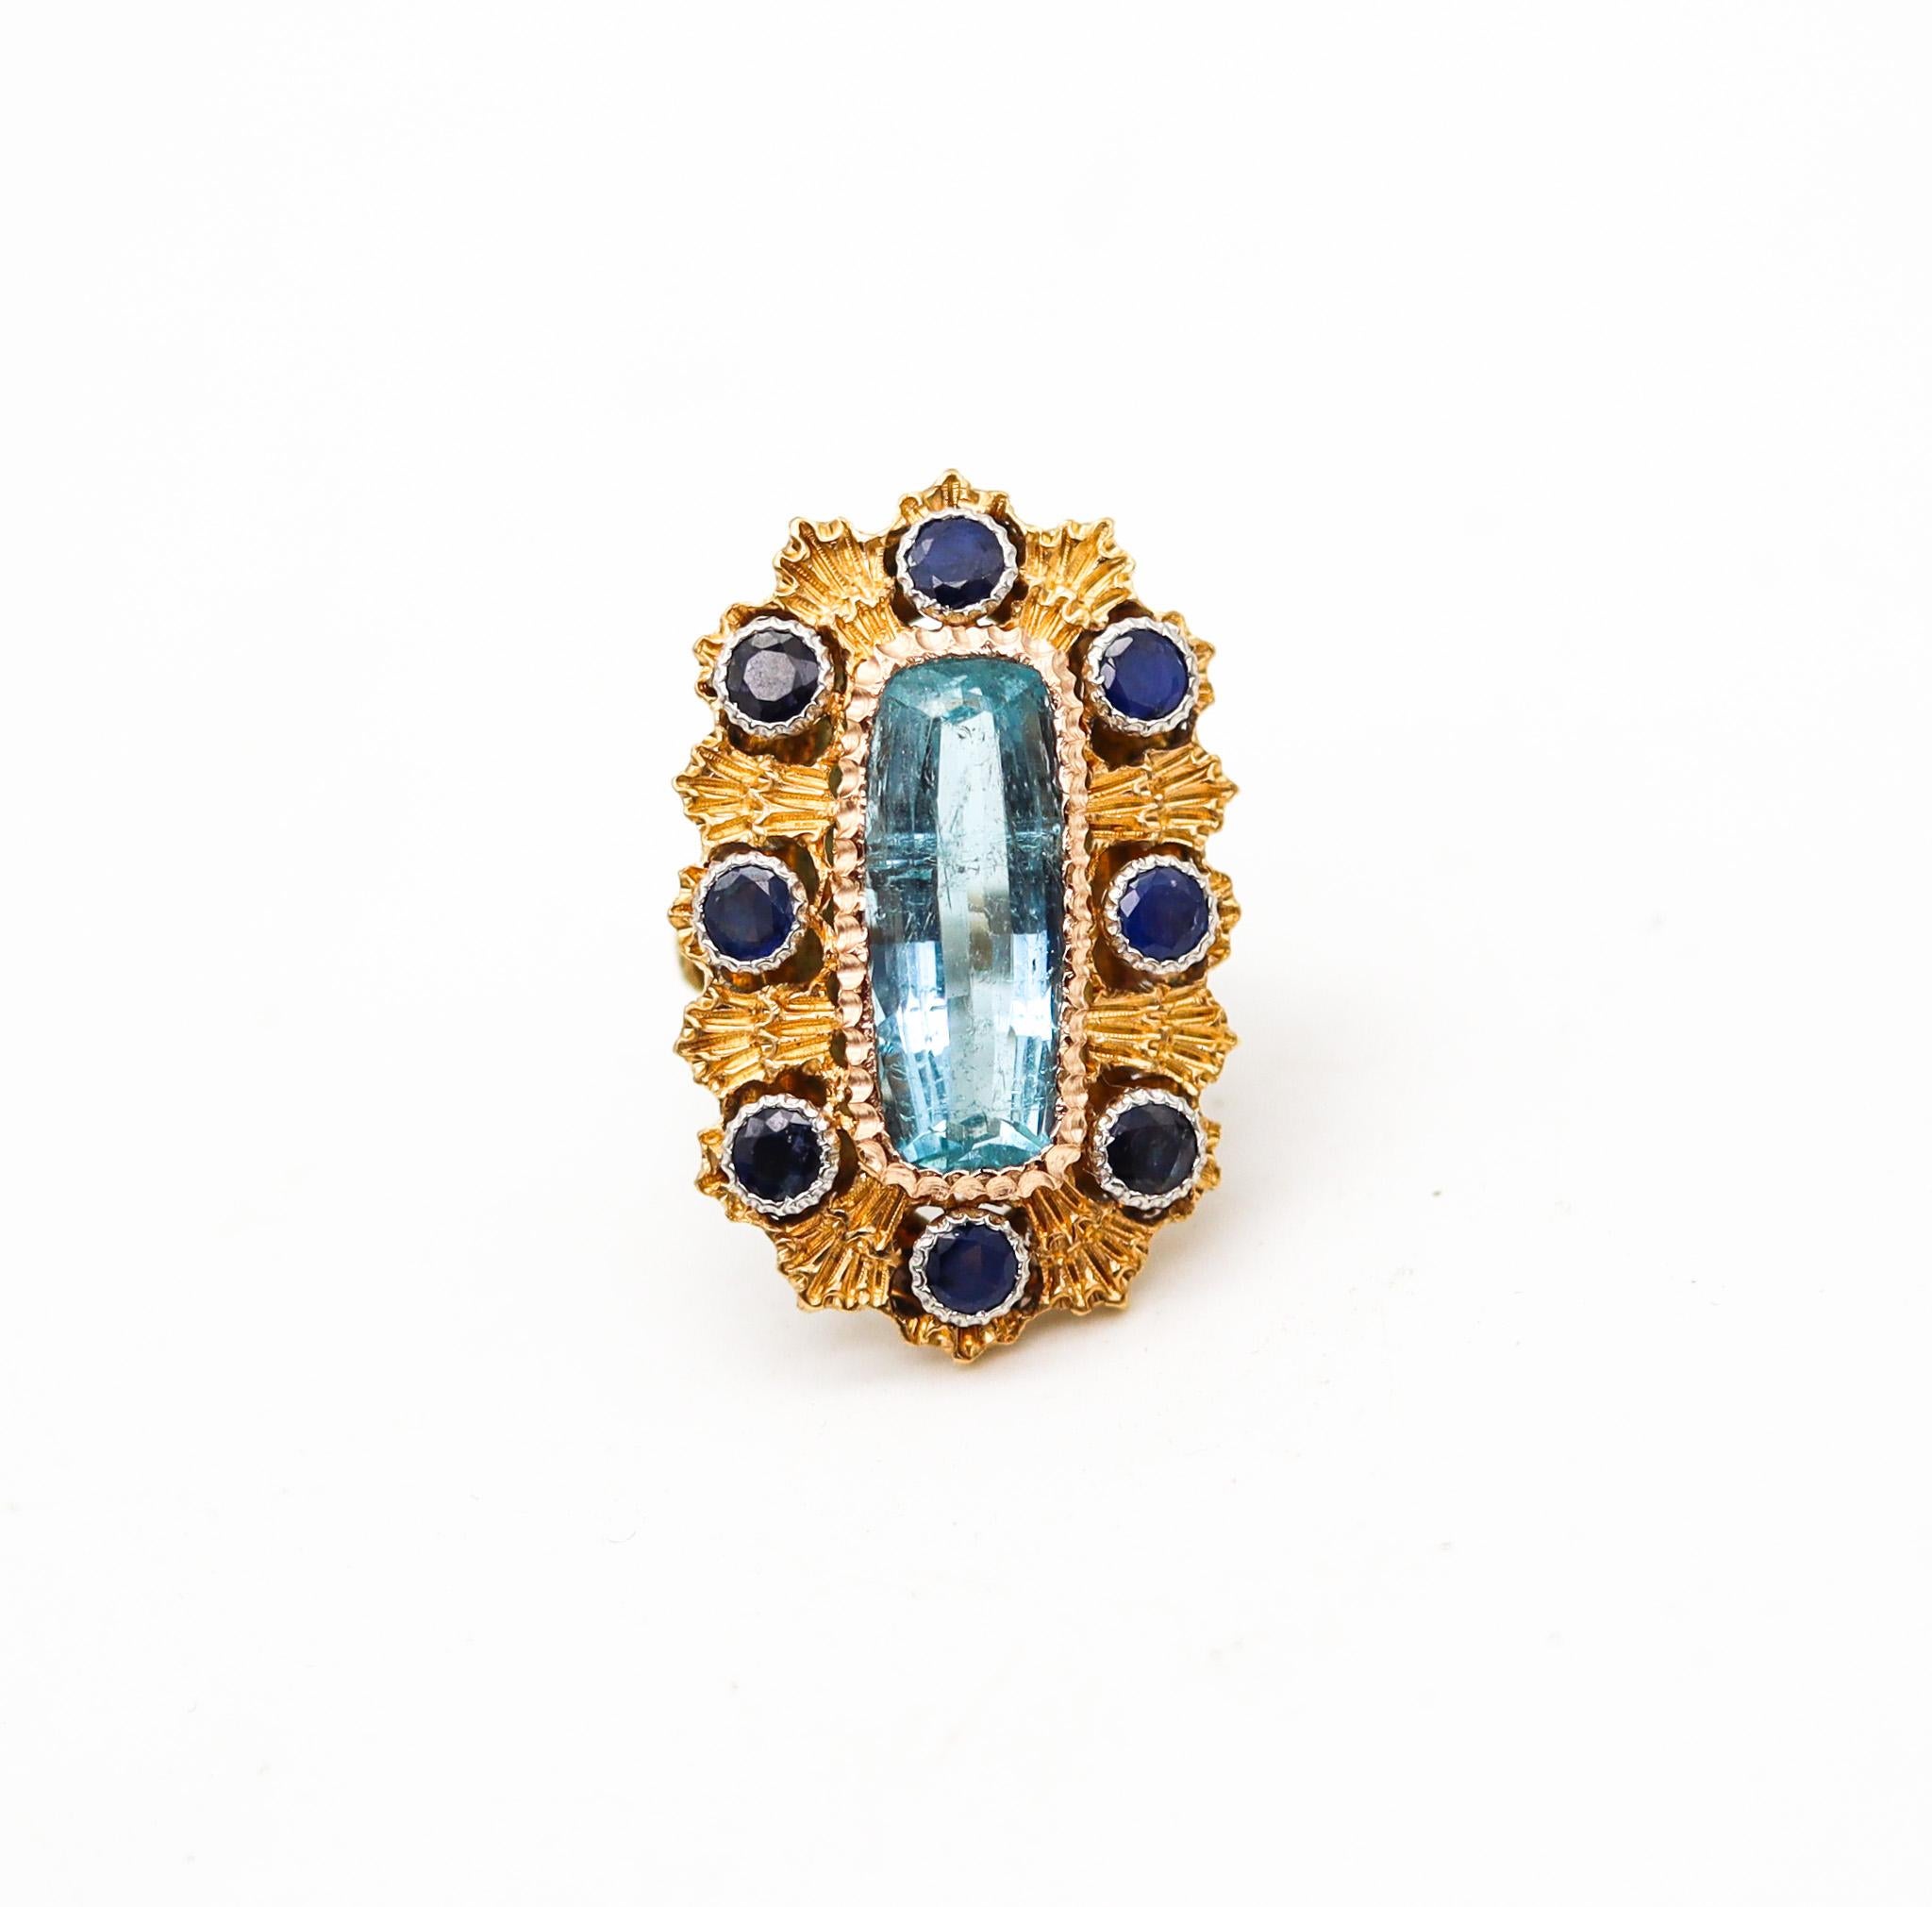 Cocktail ring designed by Buccellati.

A fastuous aquamarine and sapphires cocktail ring, made in Milan Italy by the iconic jewelry house of Buccellati, back in the 1970. This colorful piece was part of the Maison collection privee and was carefully